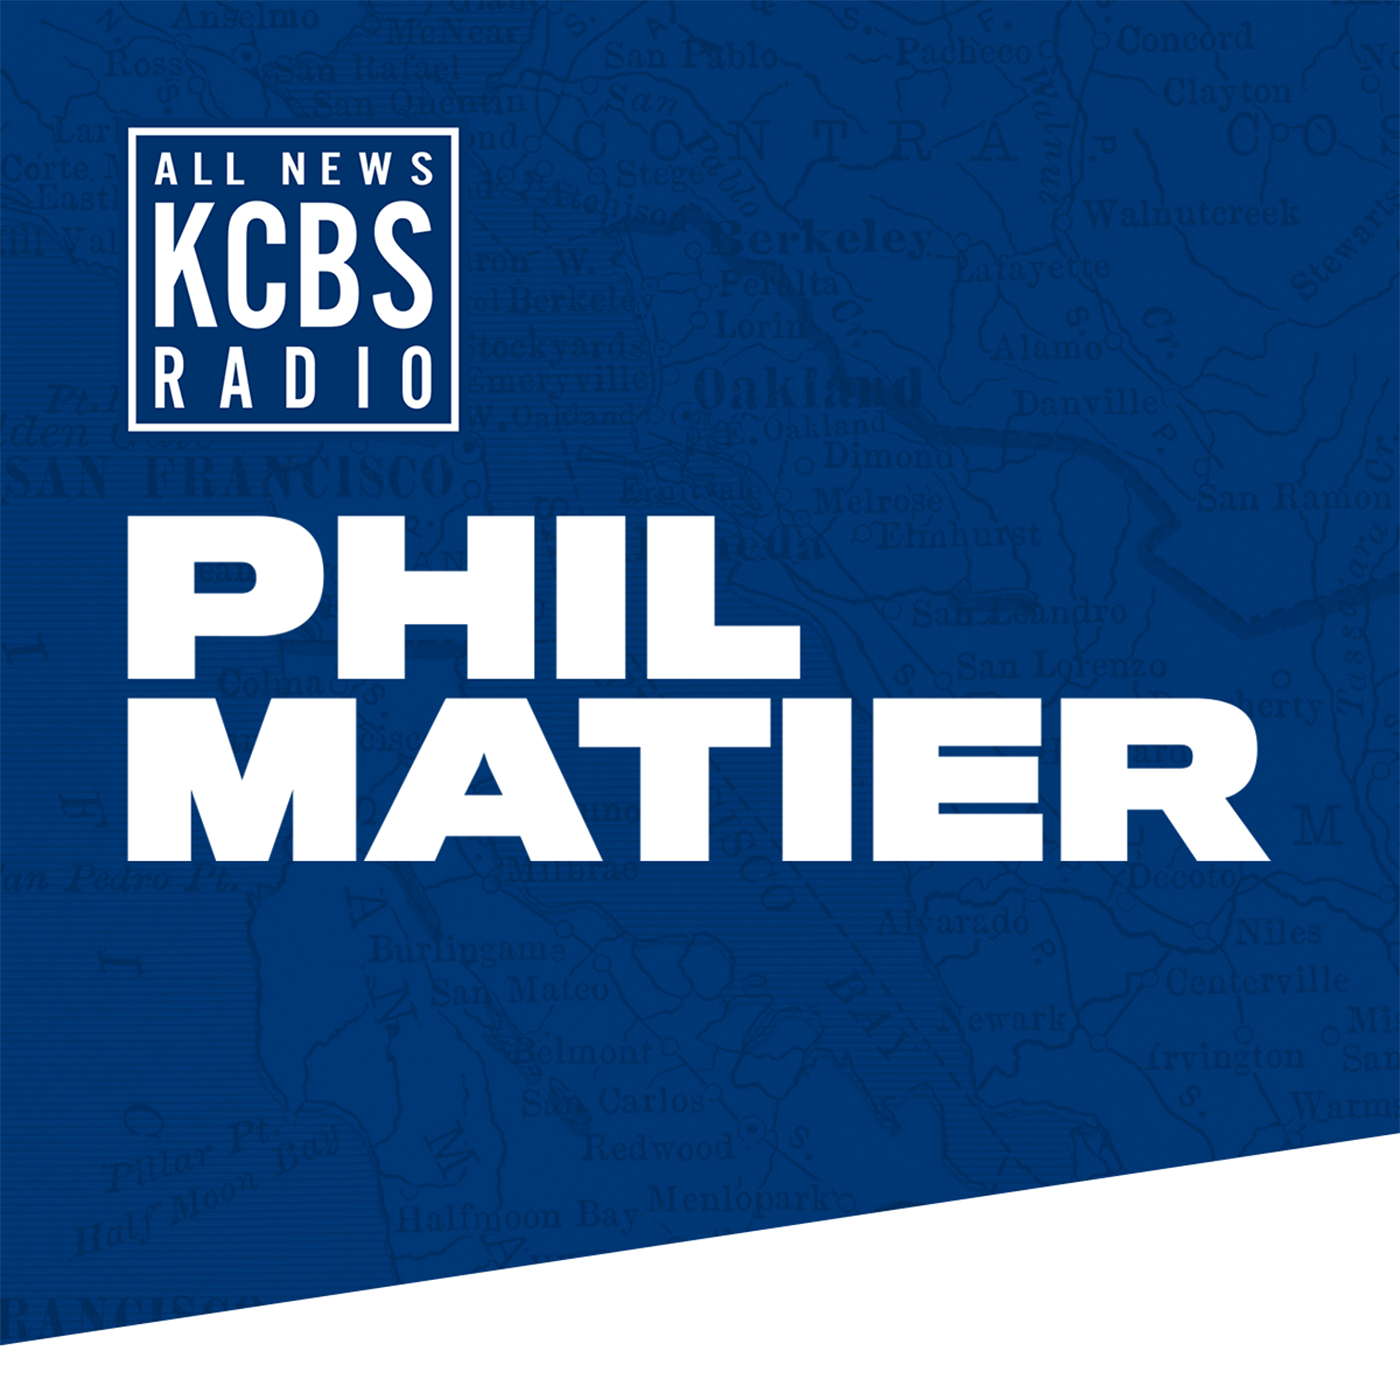 Phil Matier: The recent trend of shoplifting